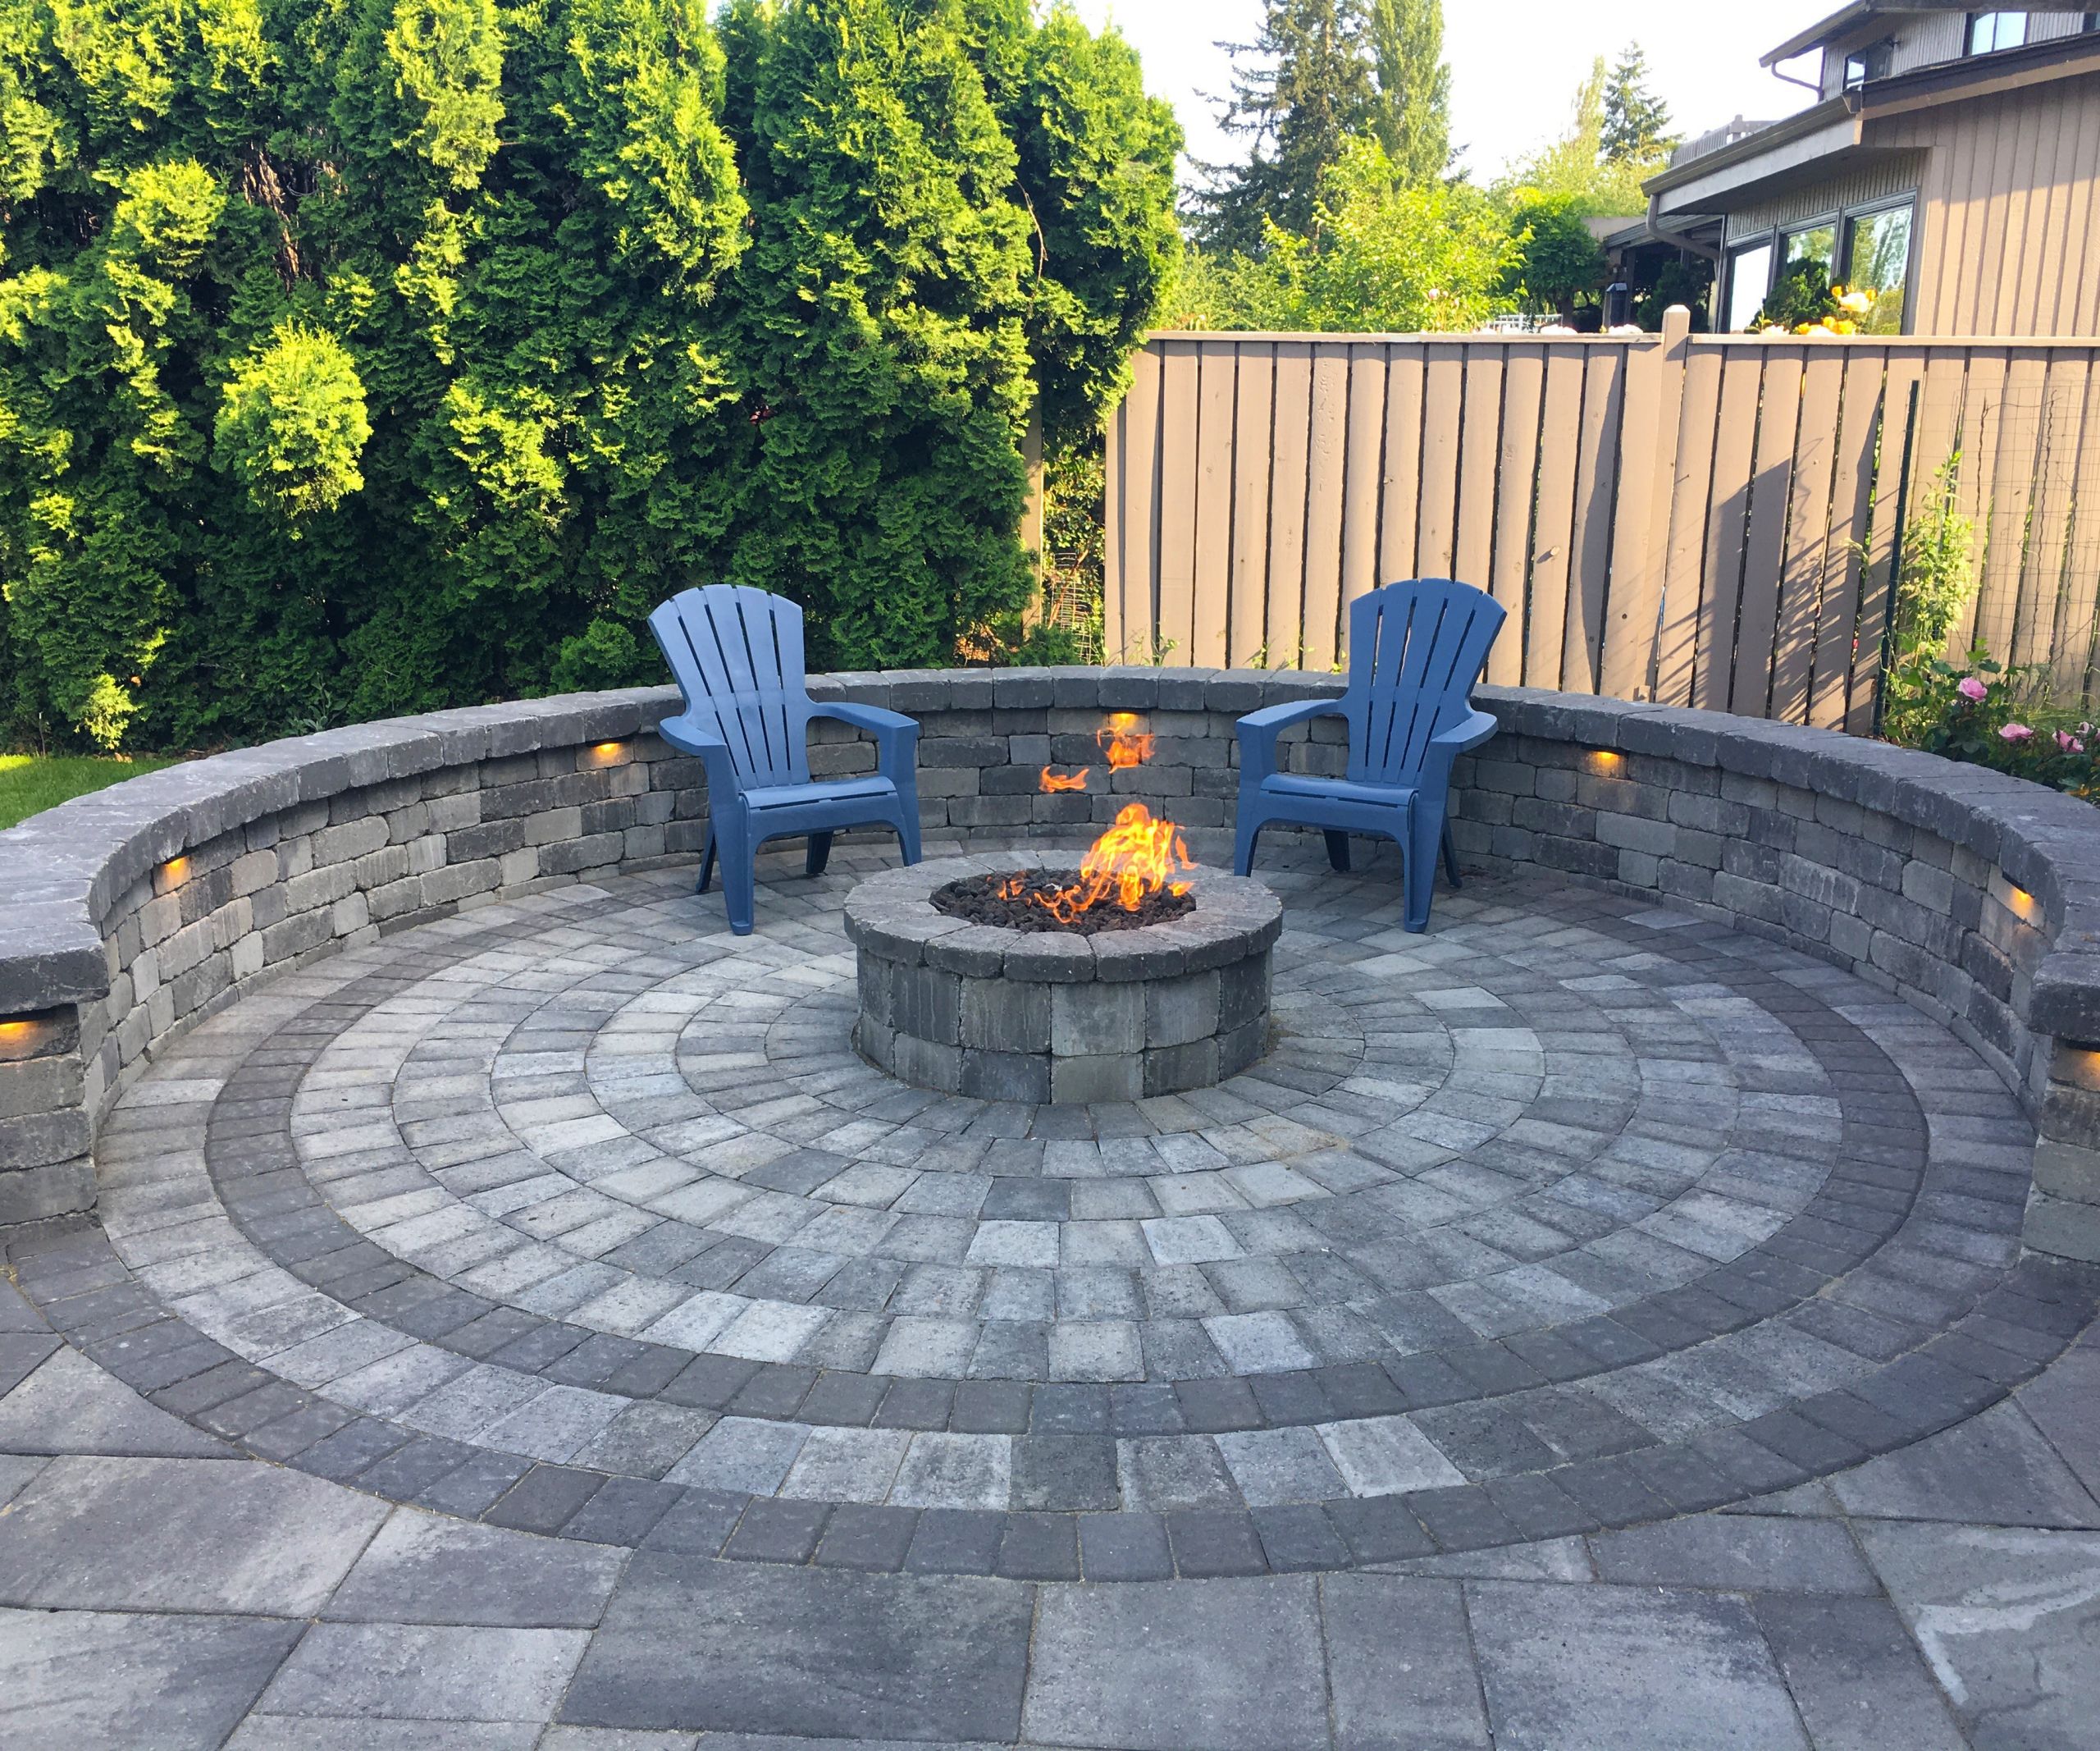 Paver Patio With Fire Pit
 Paver Stone Patio Installation Vulcan Design & Construction